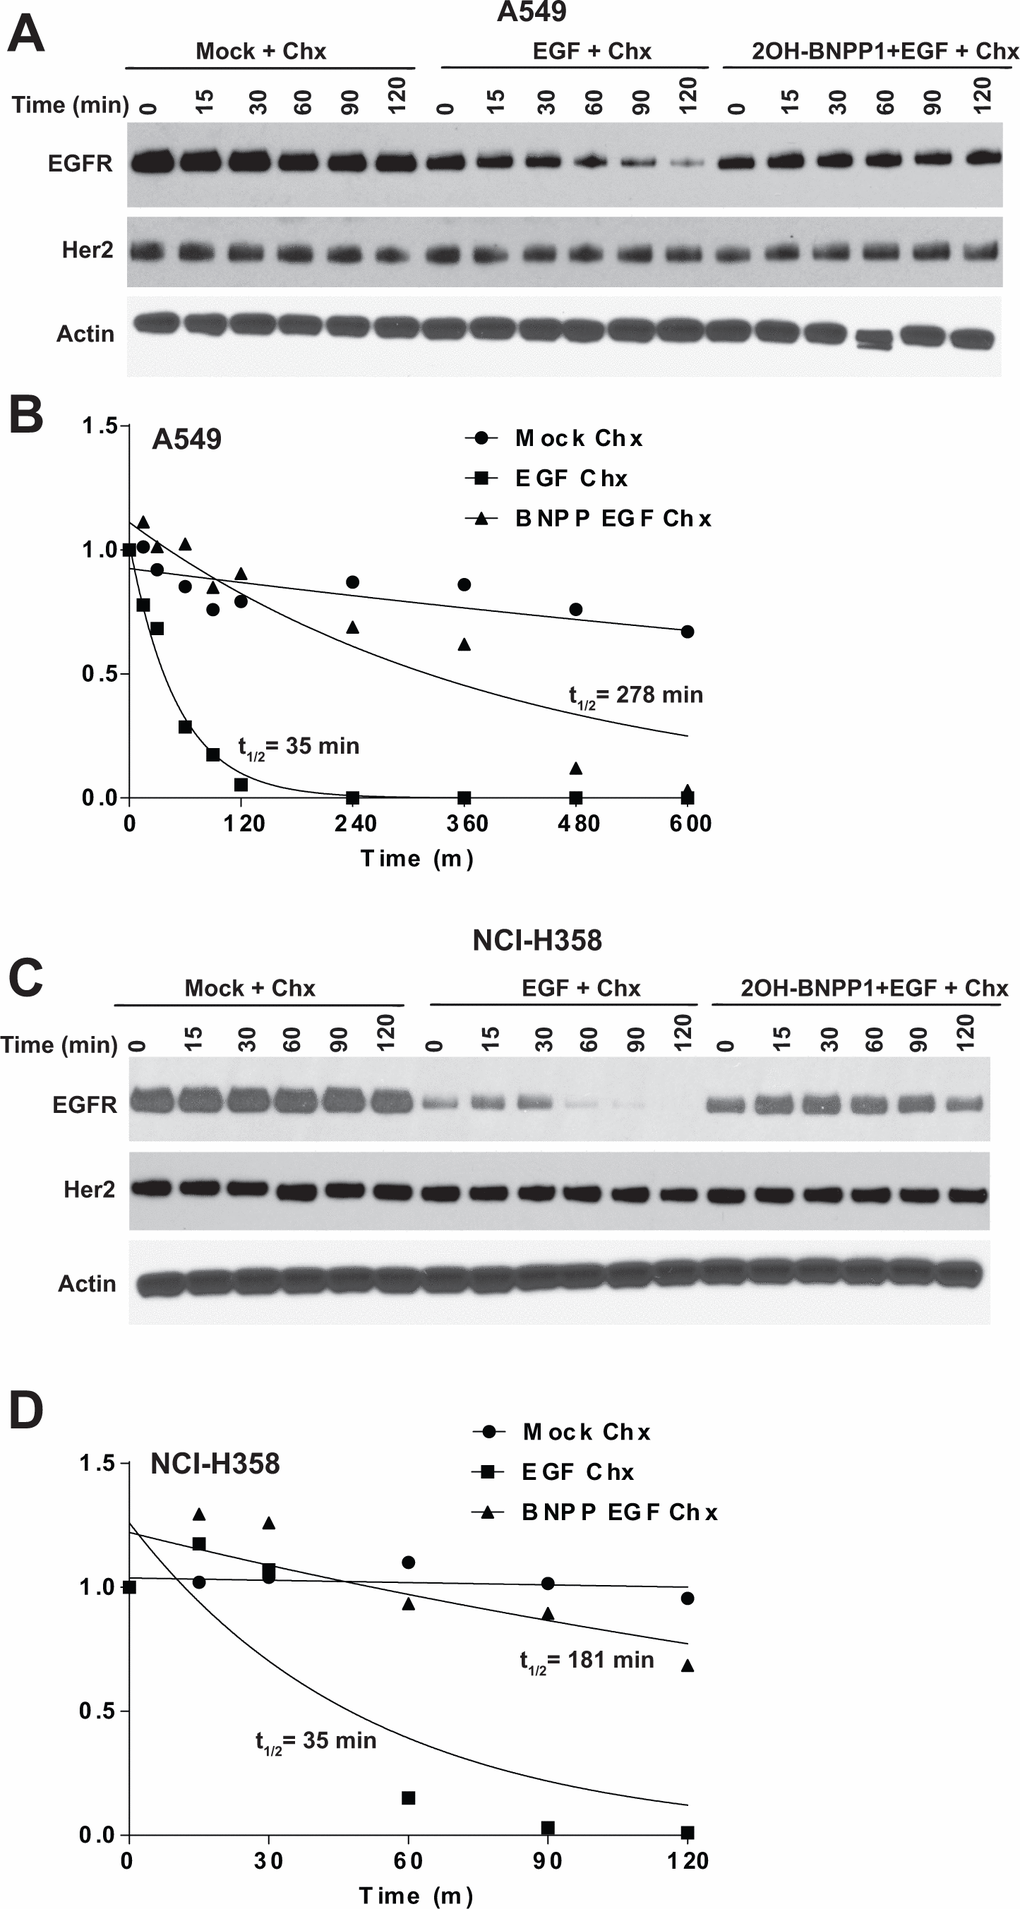 Inhibition of BUB1 kinase activity by 2OH-BNPP1 prolongs EGFR half-life. (A) A549 lung adenocarcinoma cells were treated with 2OH-BNPP1 (10 μM) and Cycloheximide (50 μg/ML) for 1 hour followed by EGF (50 ng/mL). Cells were harvested at different time points after EGF treatment and resulting lysates were run on SDS-PAGE gels and probed with EGFR, Her2 and Actin antibodies. (B) Densitometric analysis of EGFR blots in A549 was performed using ImageJ. Resulting data was analyzed in MS-Excel. The protein half-life plots (t1/2) were generated using GraphPad Prism. The plots are of combined data from 2-3 biological repeats is shown. (C, D) NCI-H358 cell lines was treated similar to A549 and EGFR protein half-life was estimated by densitometric analysis.